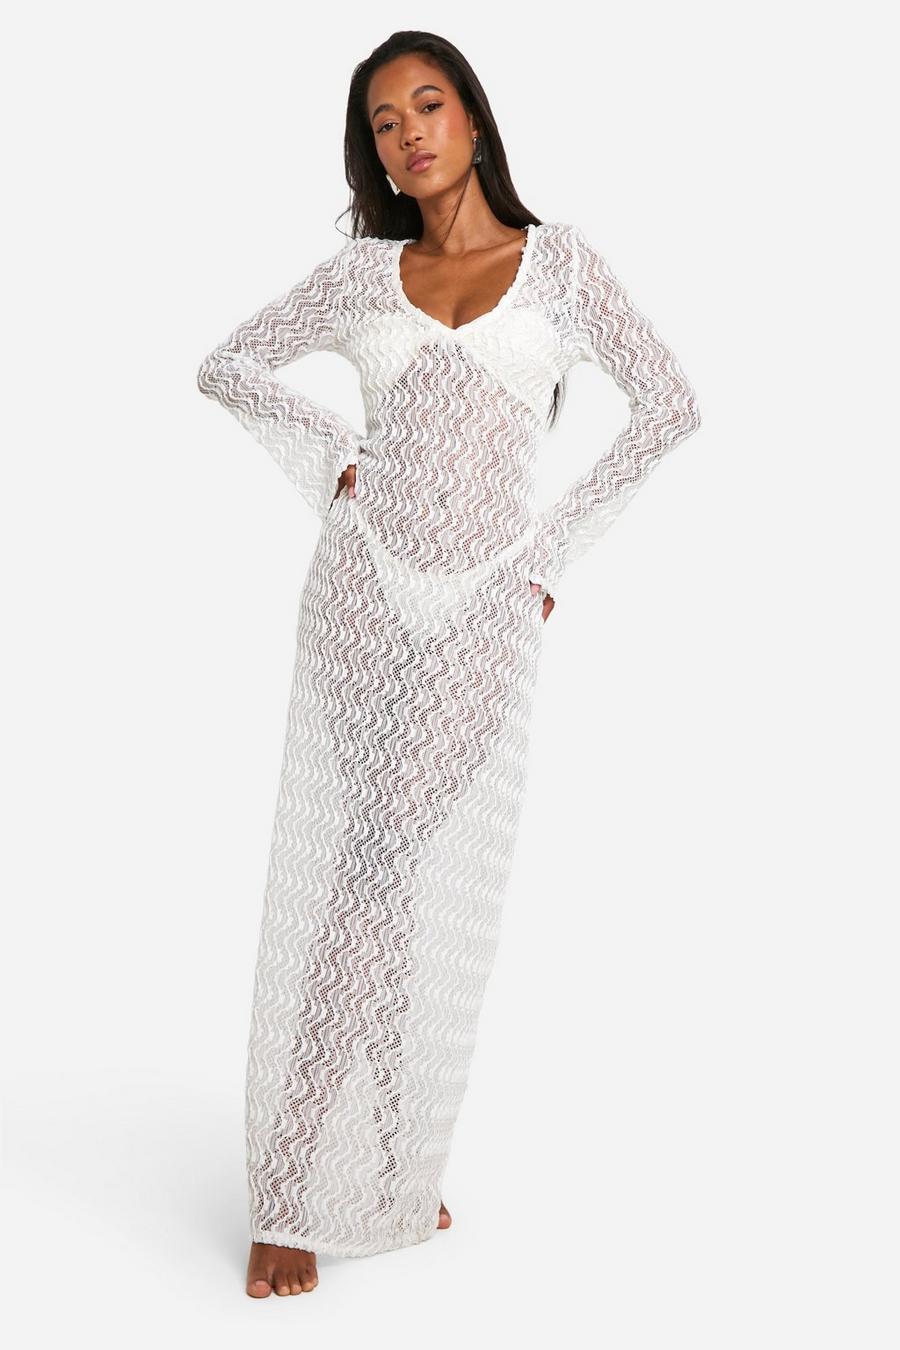 White Textured Lace Beach Maxi Cover-up Dress image number 1